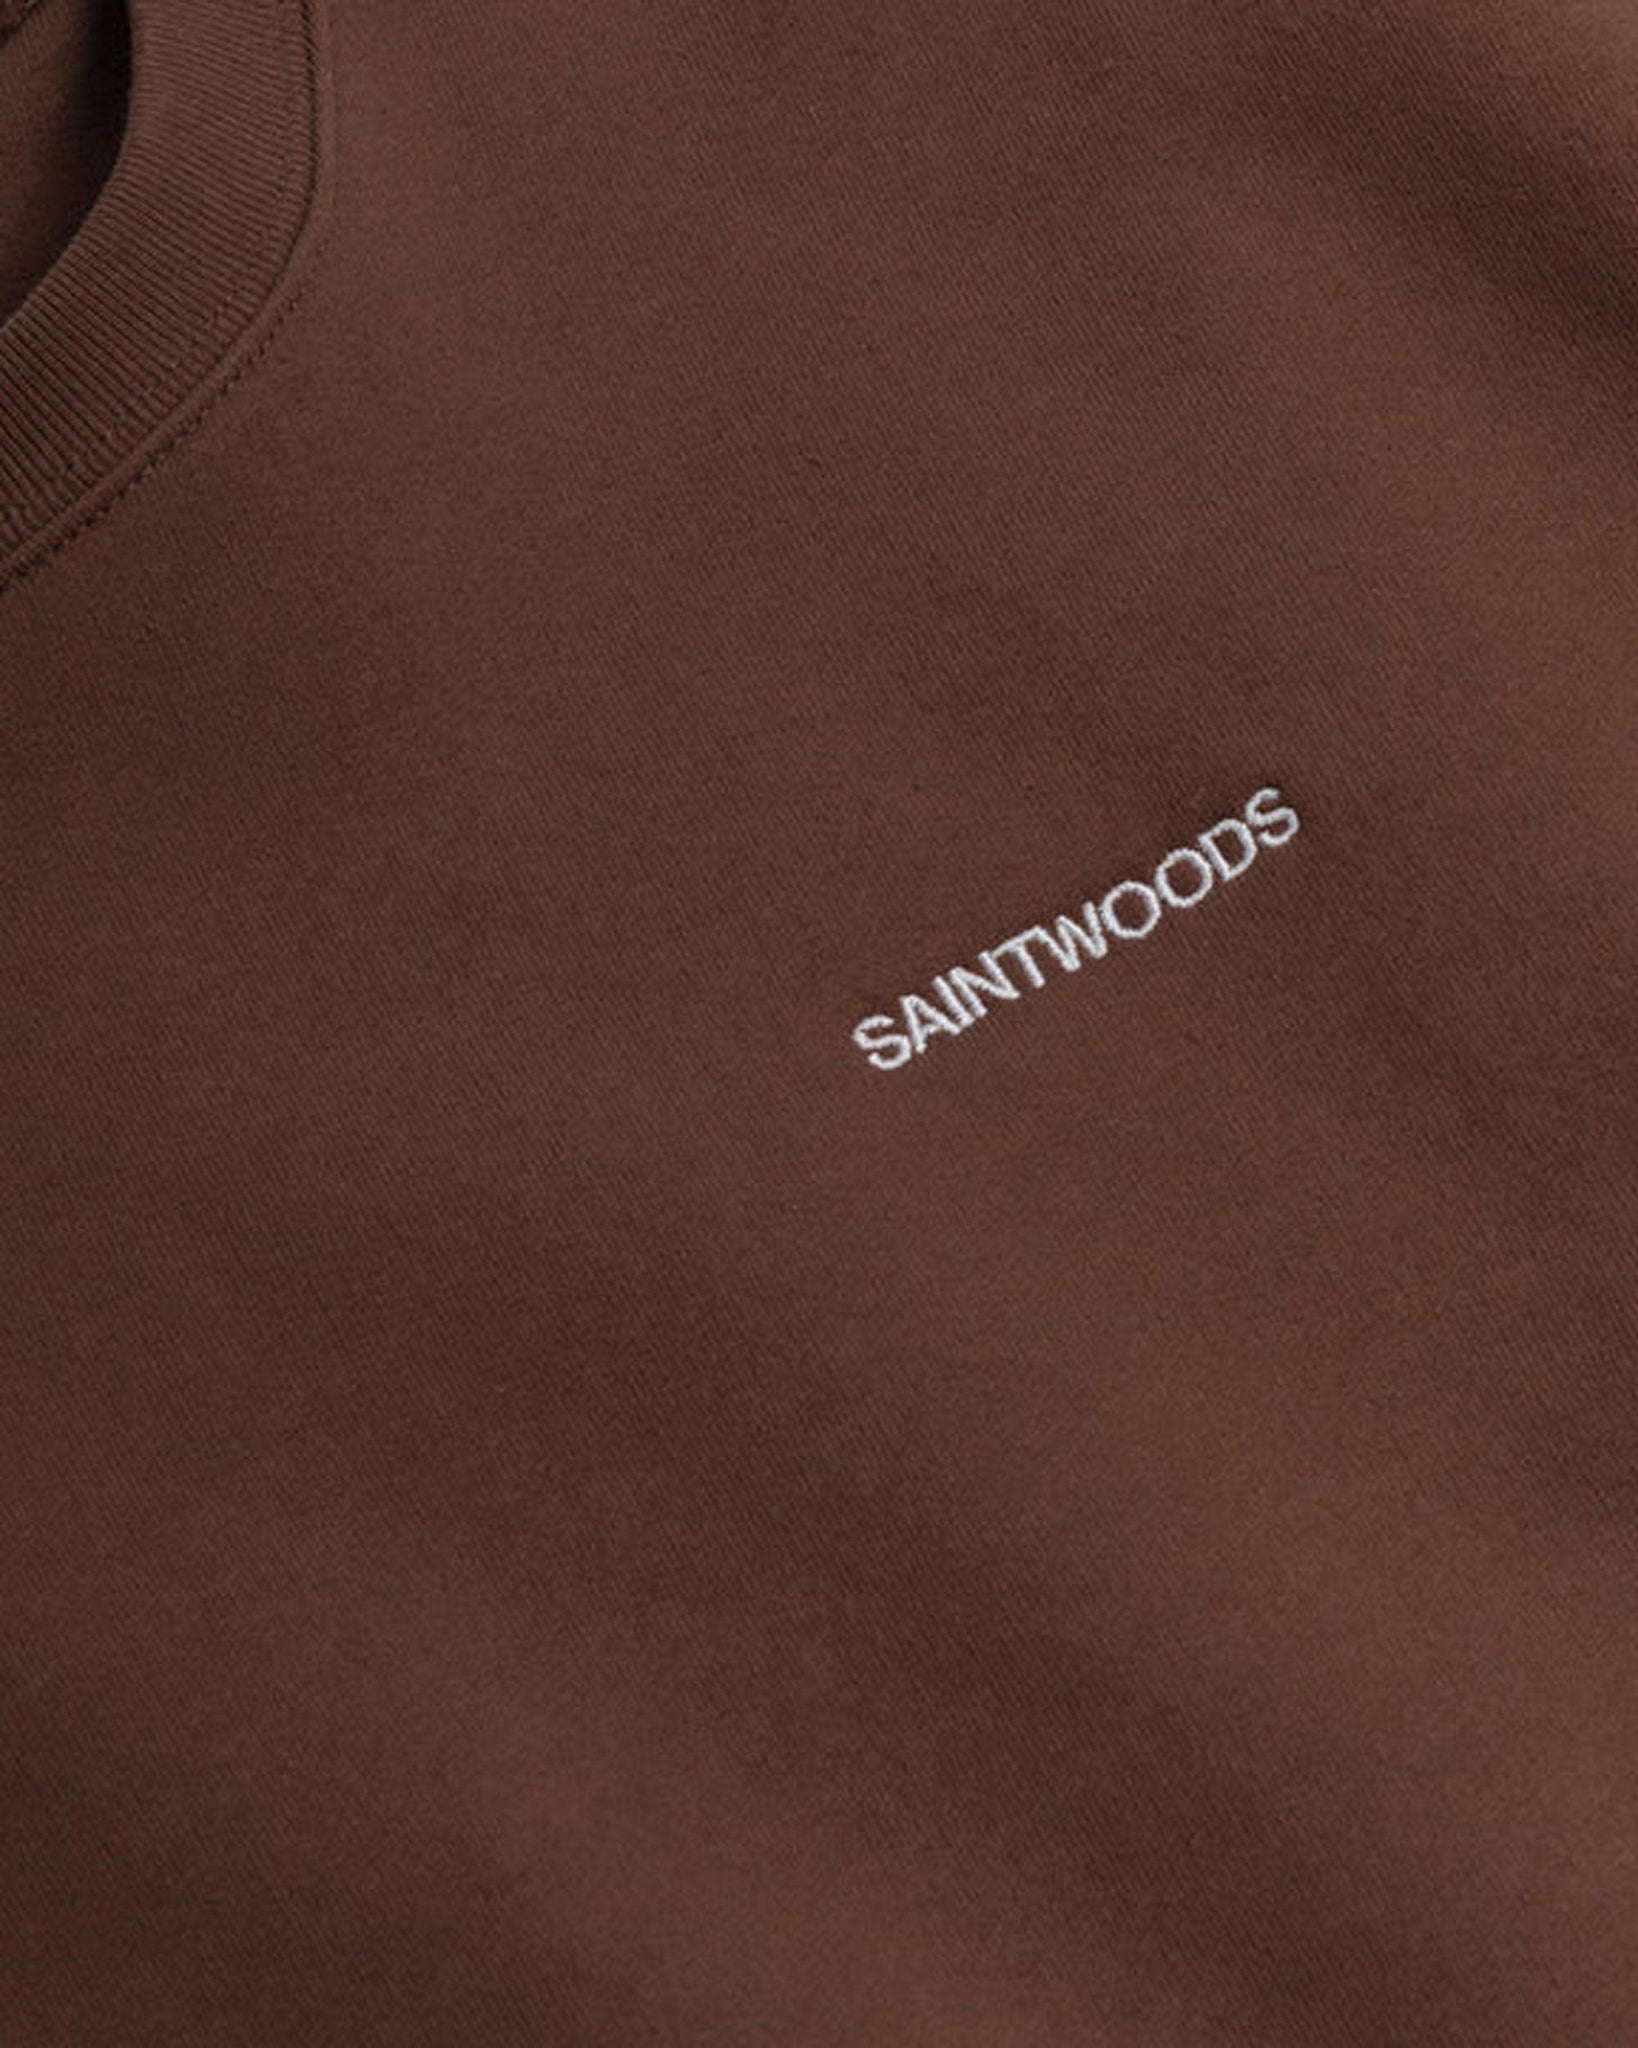 SW Sweatshirt Brown - {{ collection.title }} - Chinatown Country Club 